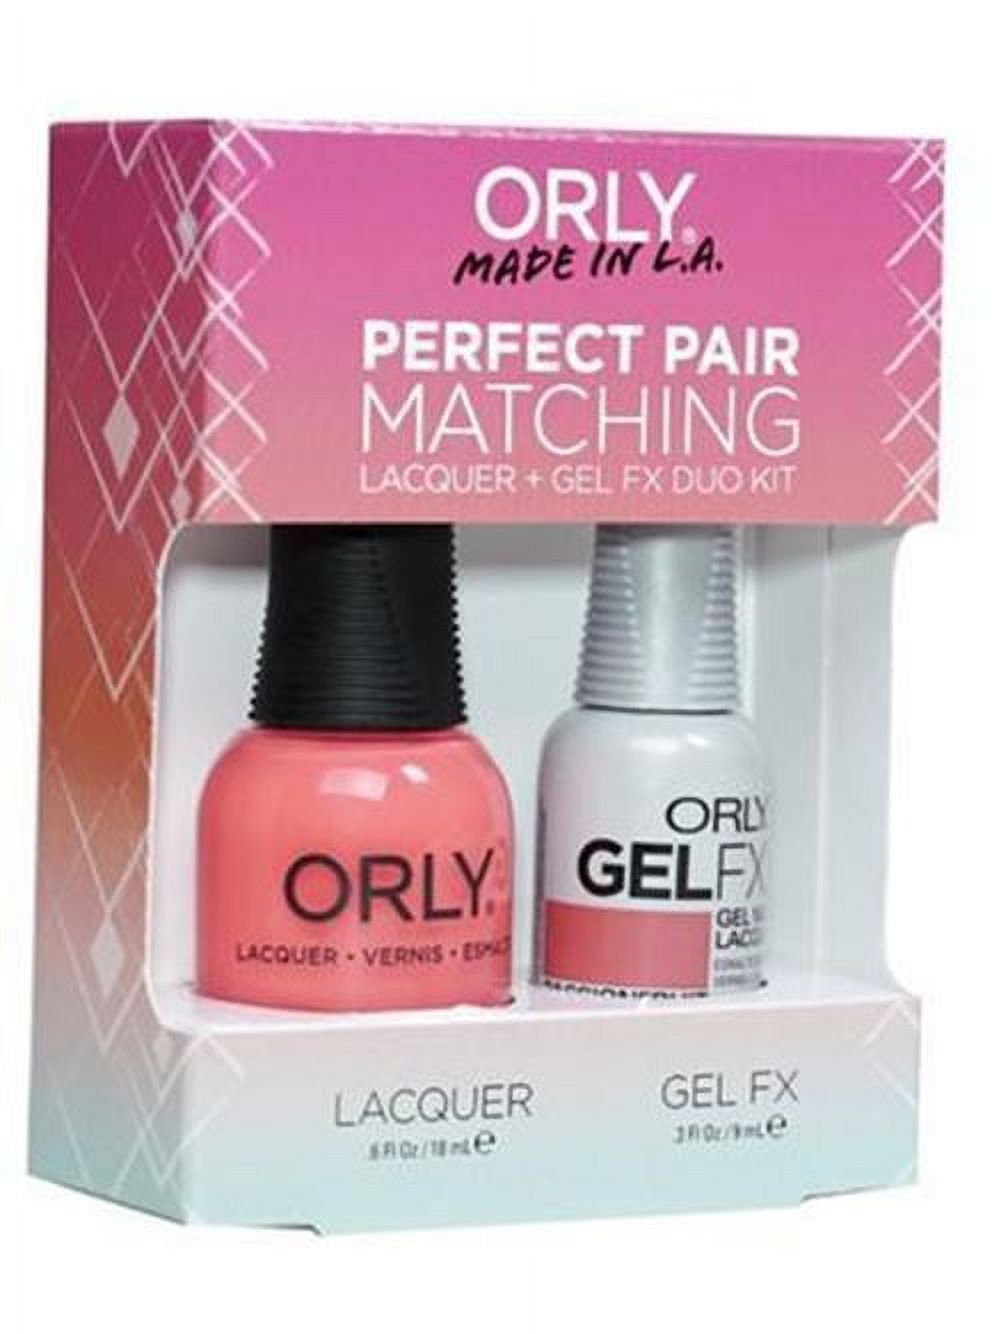 ORLY- Nail Lacquer Duo Kit-Pixy Stix  (Lacq + Gel) - image 1 of 2